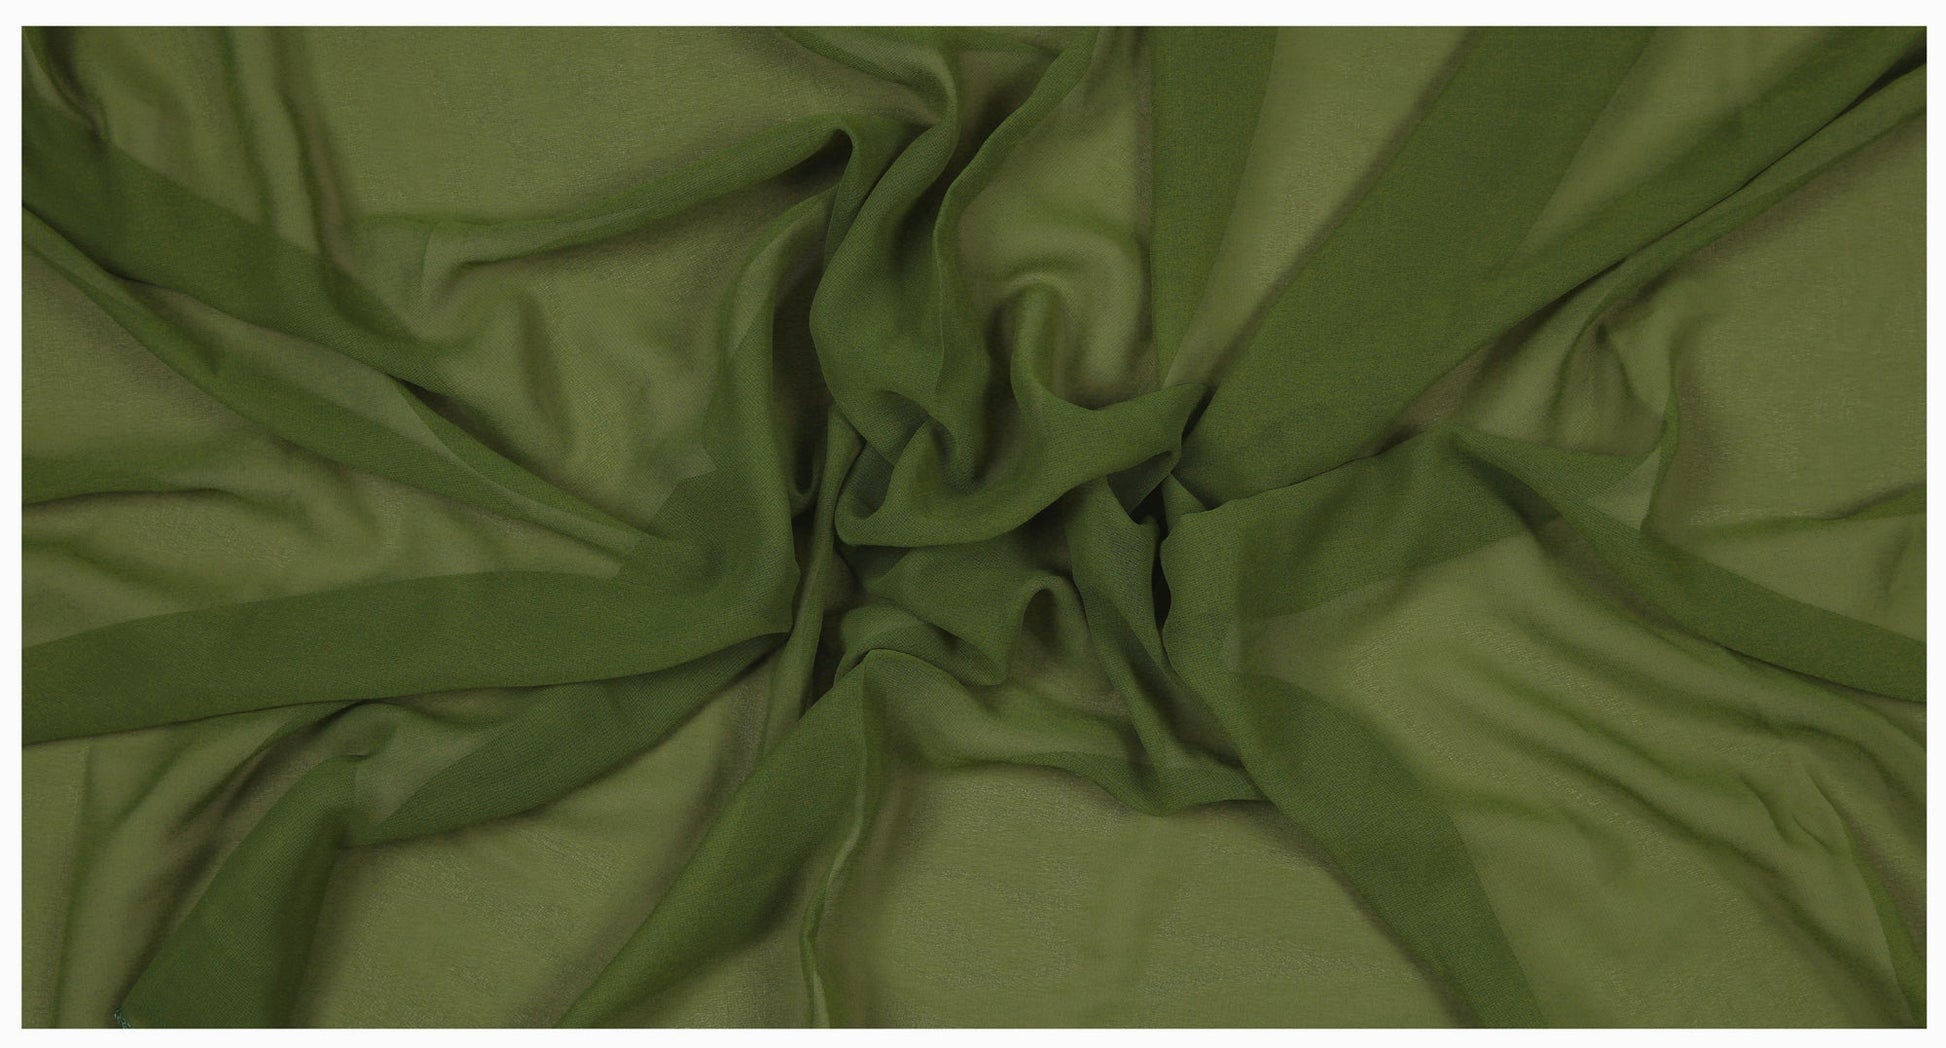 Olive Green,e5cba367-877f-4094-9dff-67dcaf2bc050